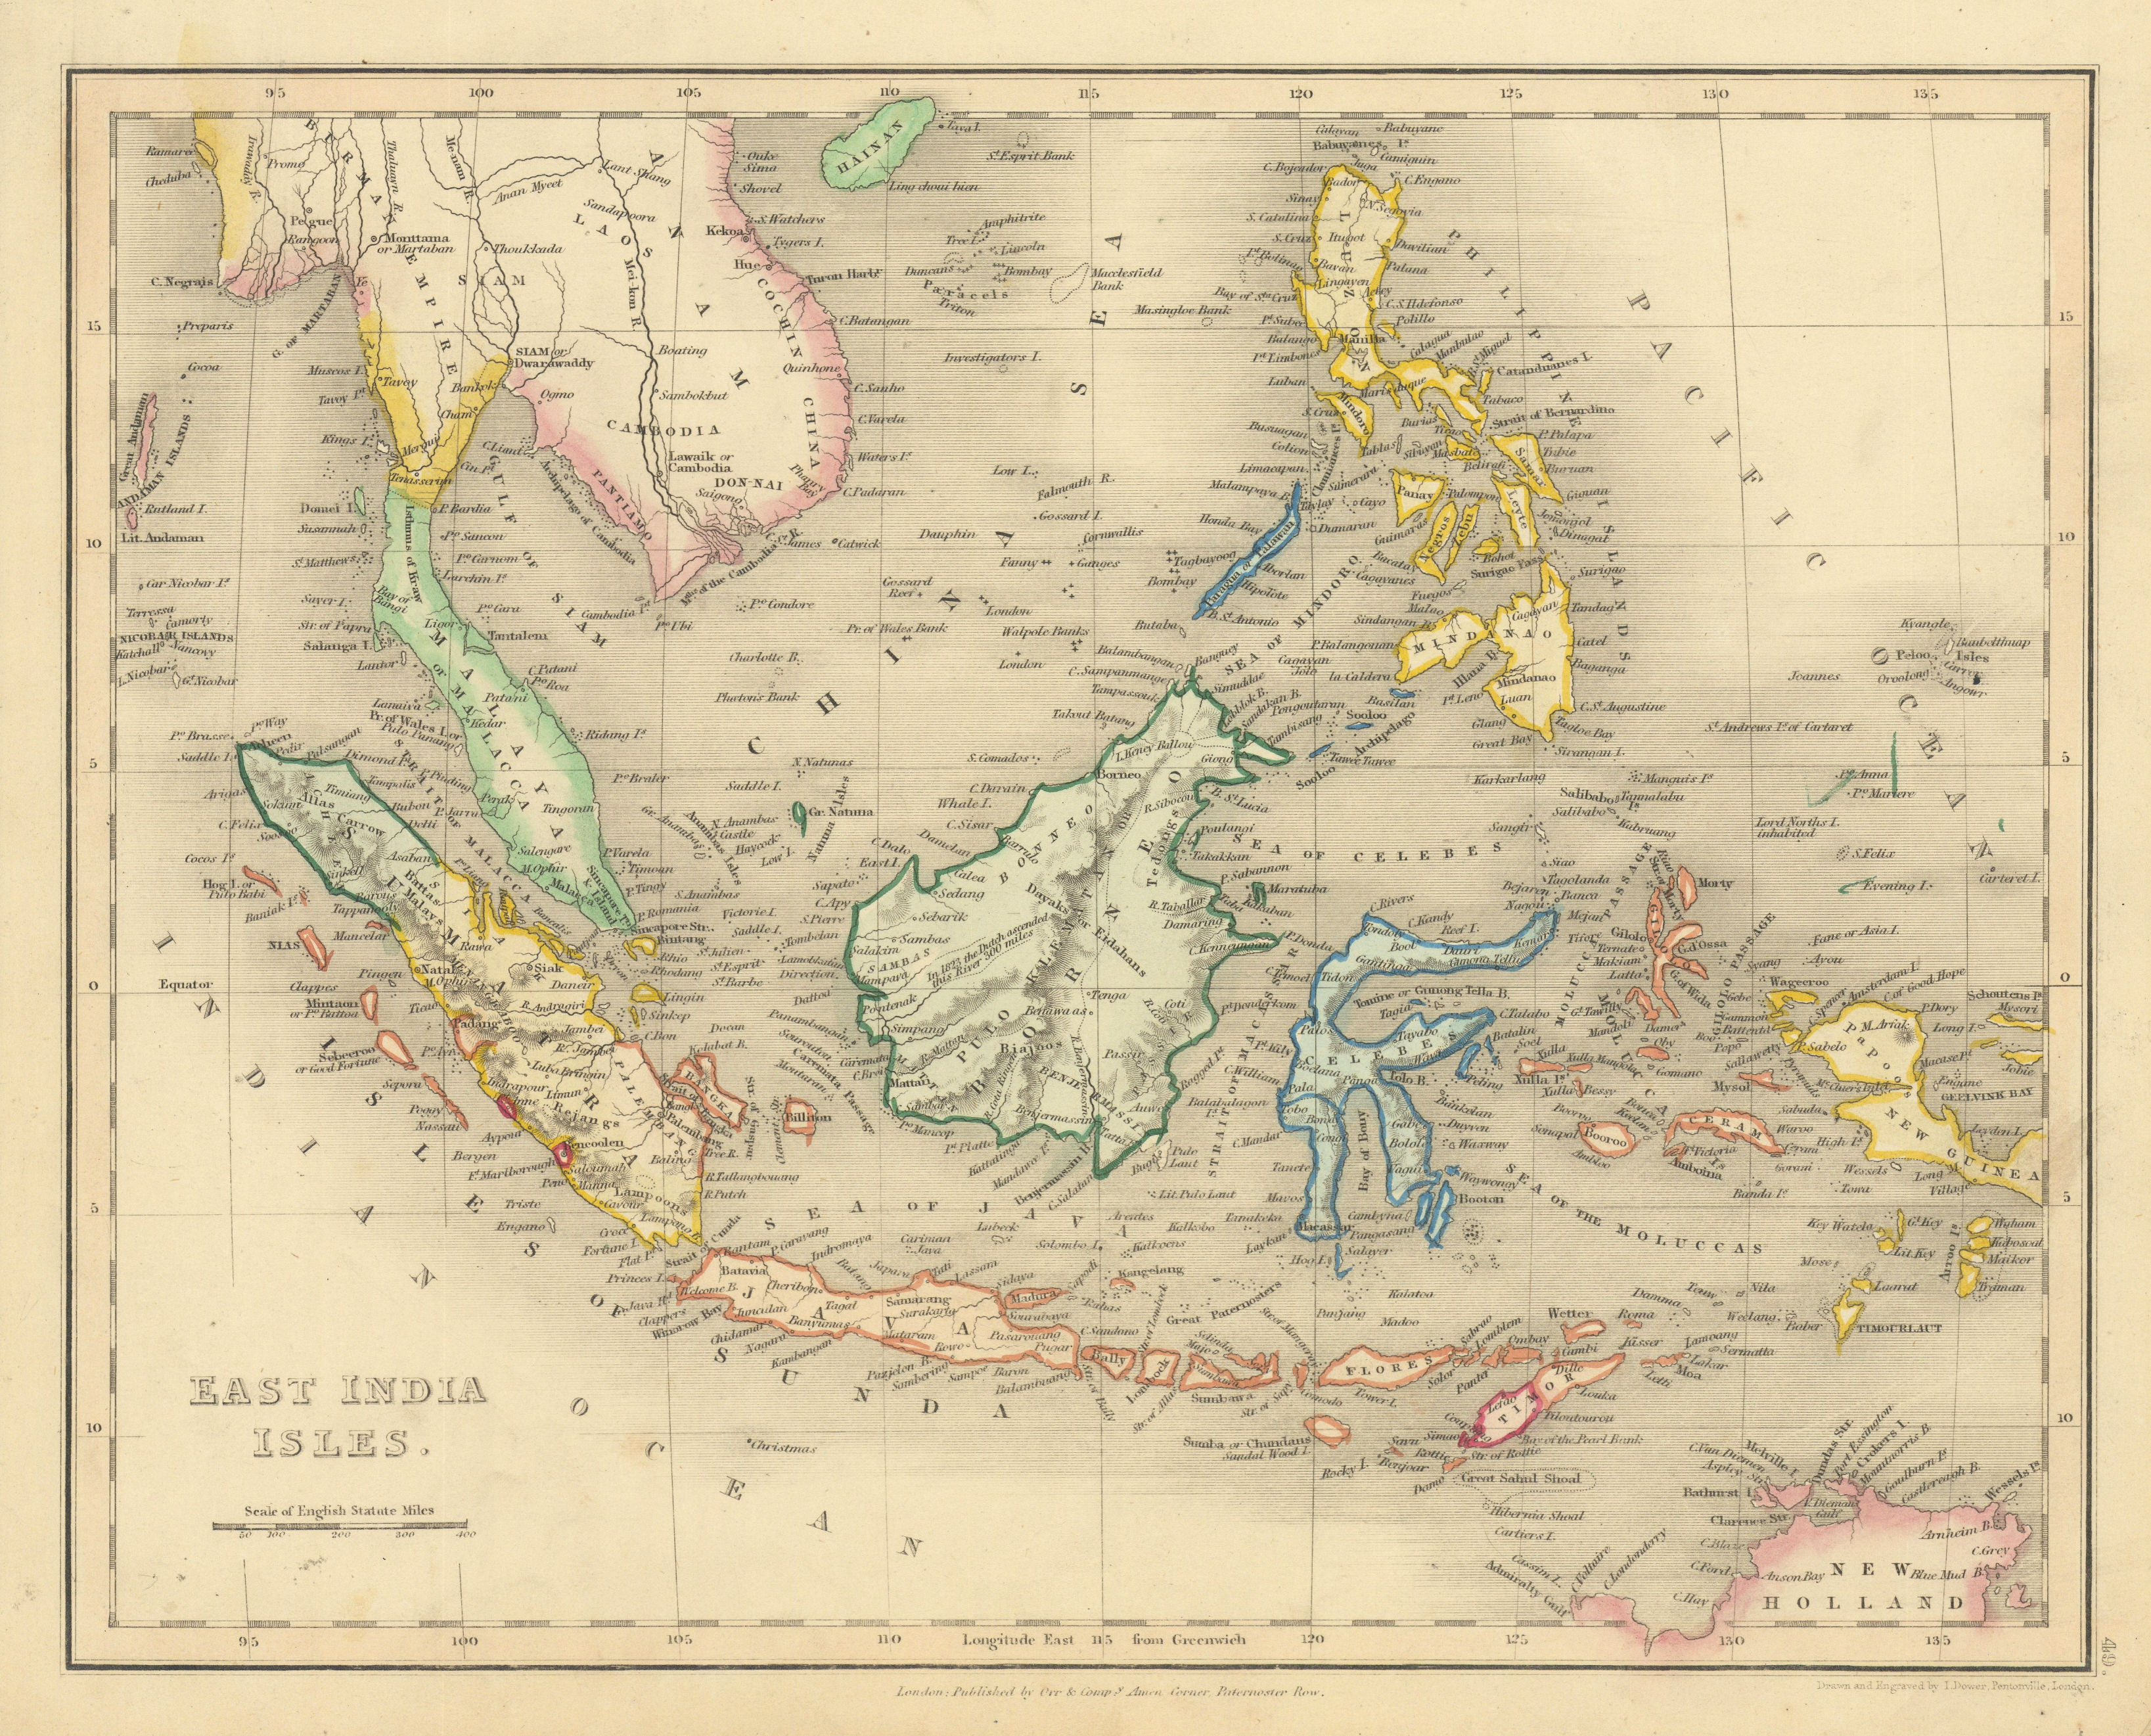 East India Isles by John Dower. Indonesia Philippines Malaya 1845 old map